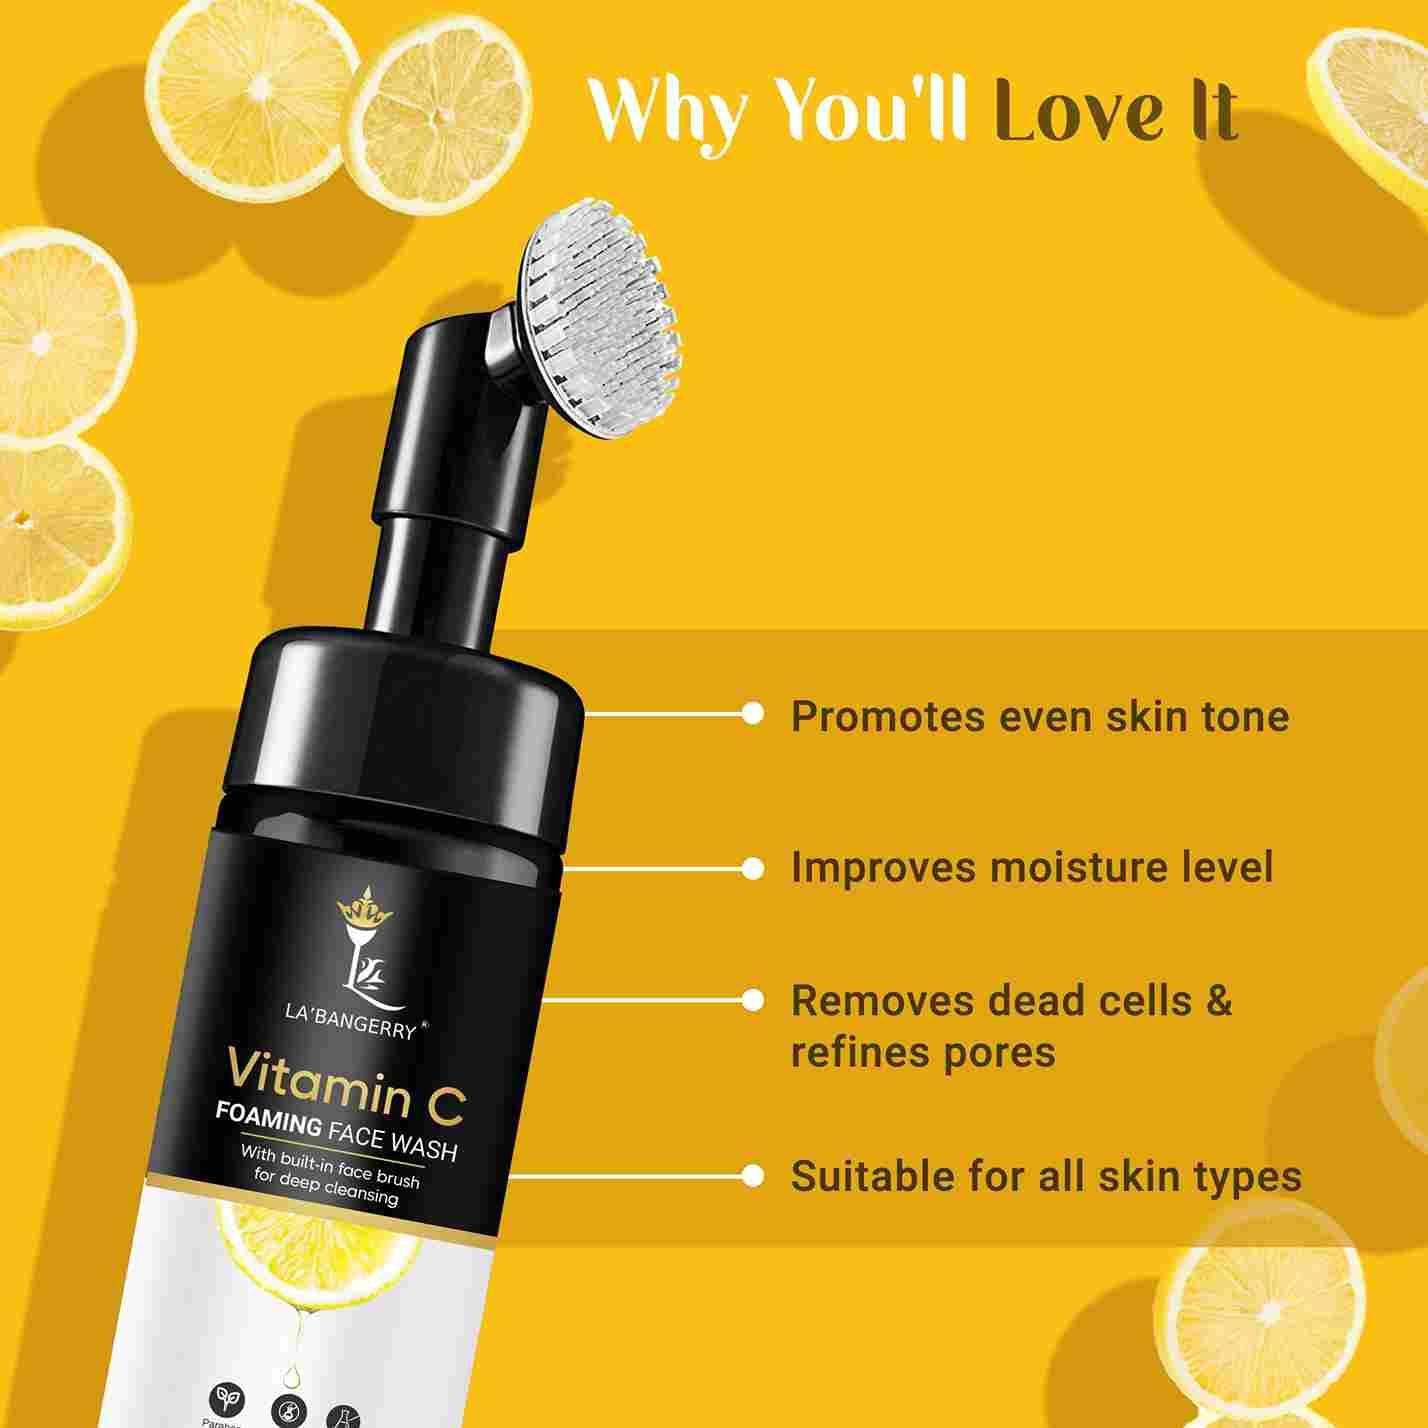 Vitamin C Brightening Foaming Face Wash with Built-In Brush 150ml Pack Of 2 - Premium  from Roposo Clout - Just $700! Shop now at Mystical9